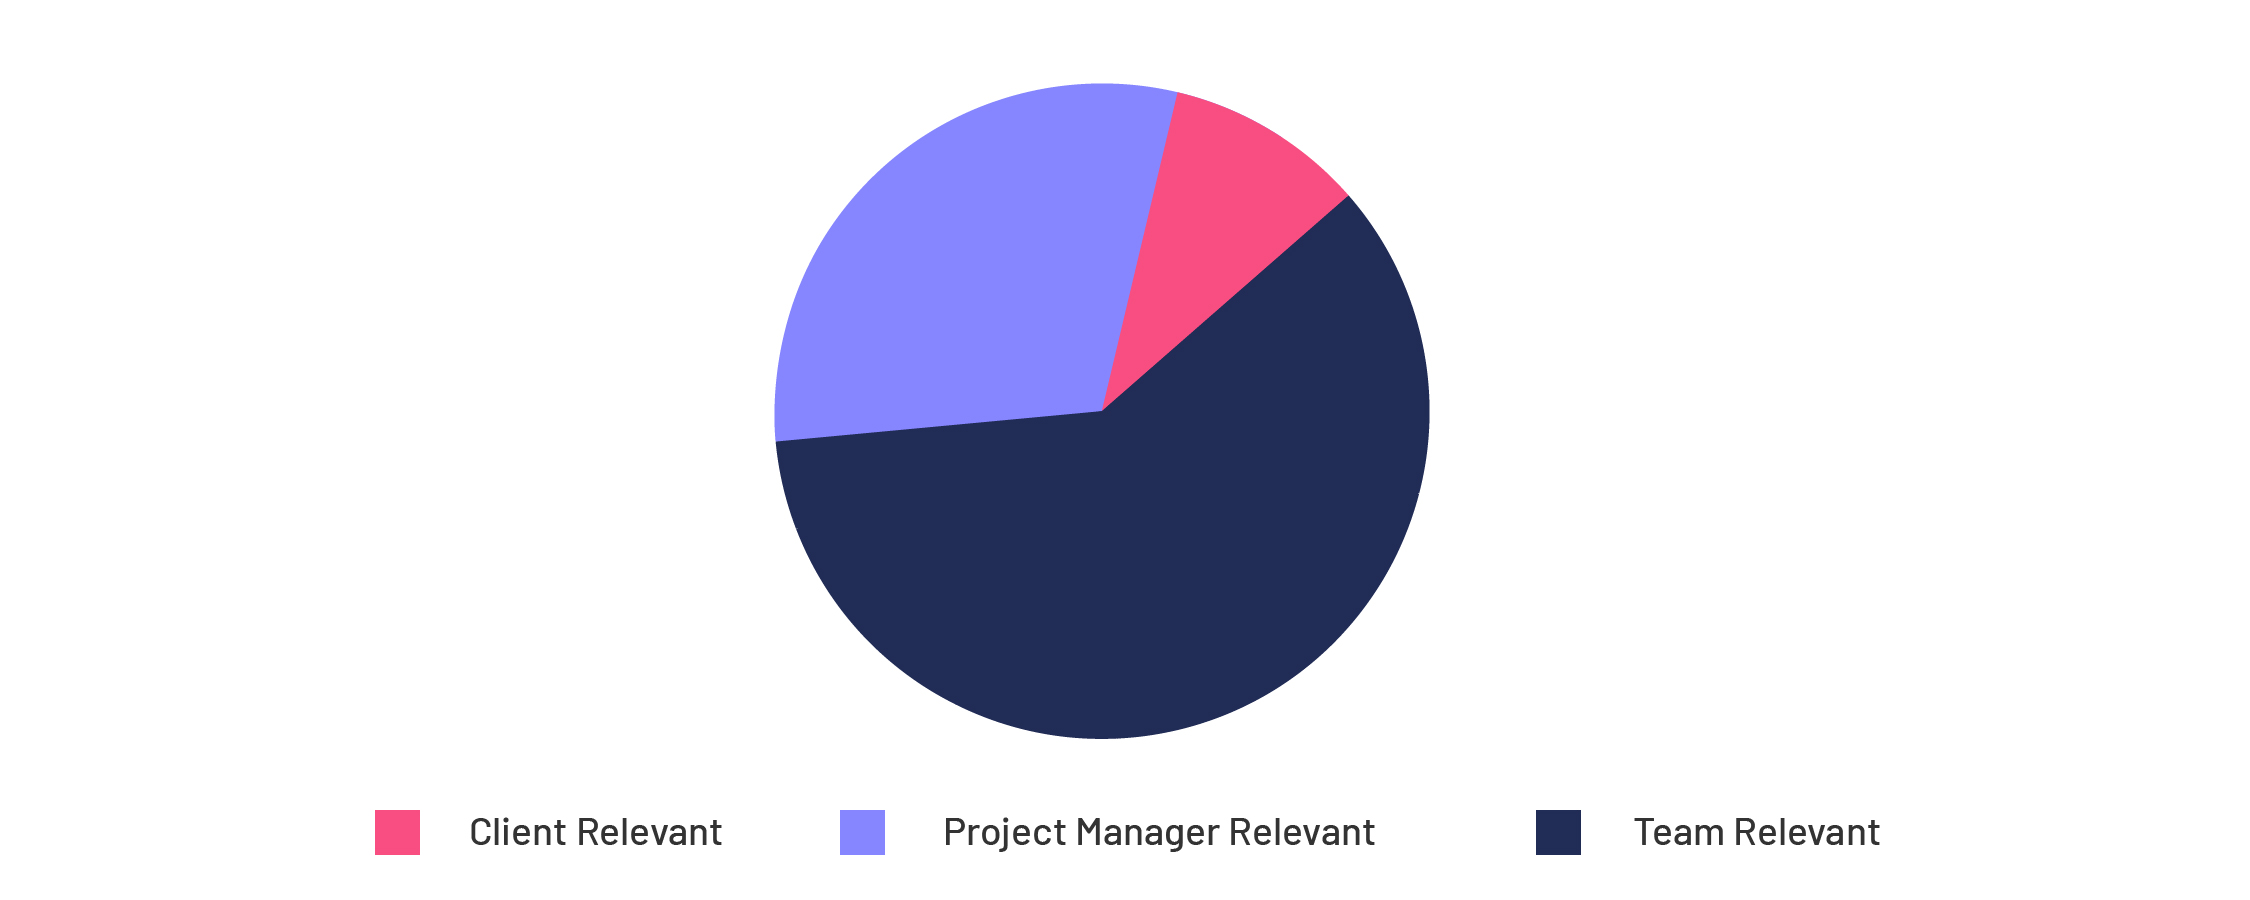 A pie-chart depicting priorities of leaders, actively managing remote teams, that they would like to address for ease of work